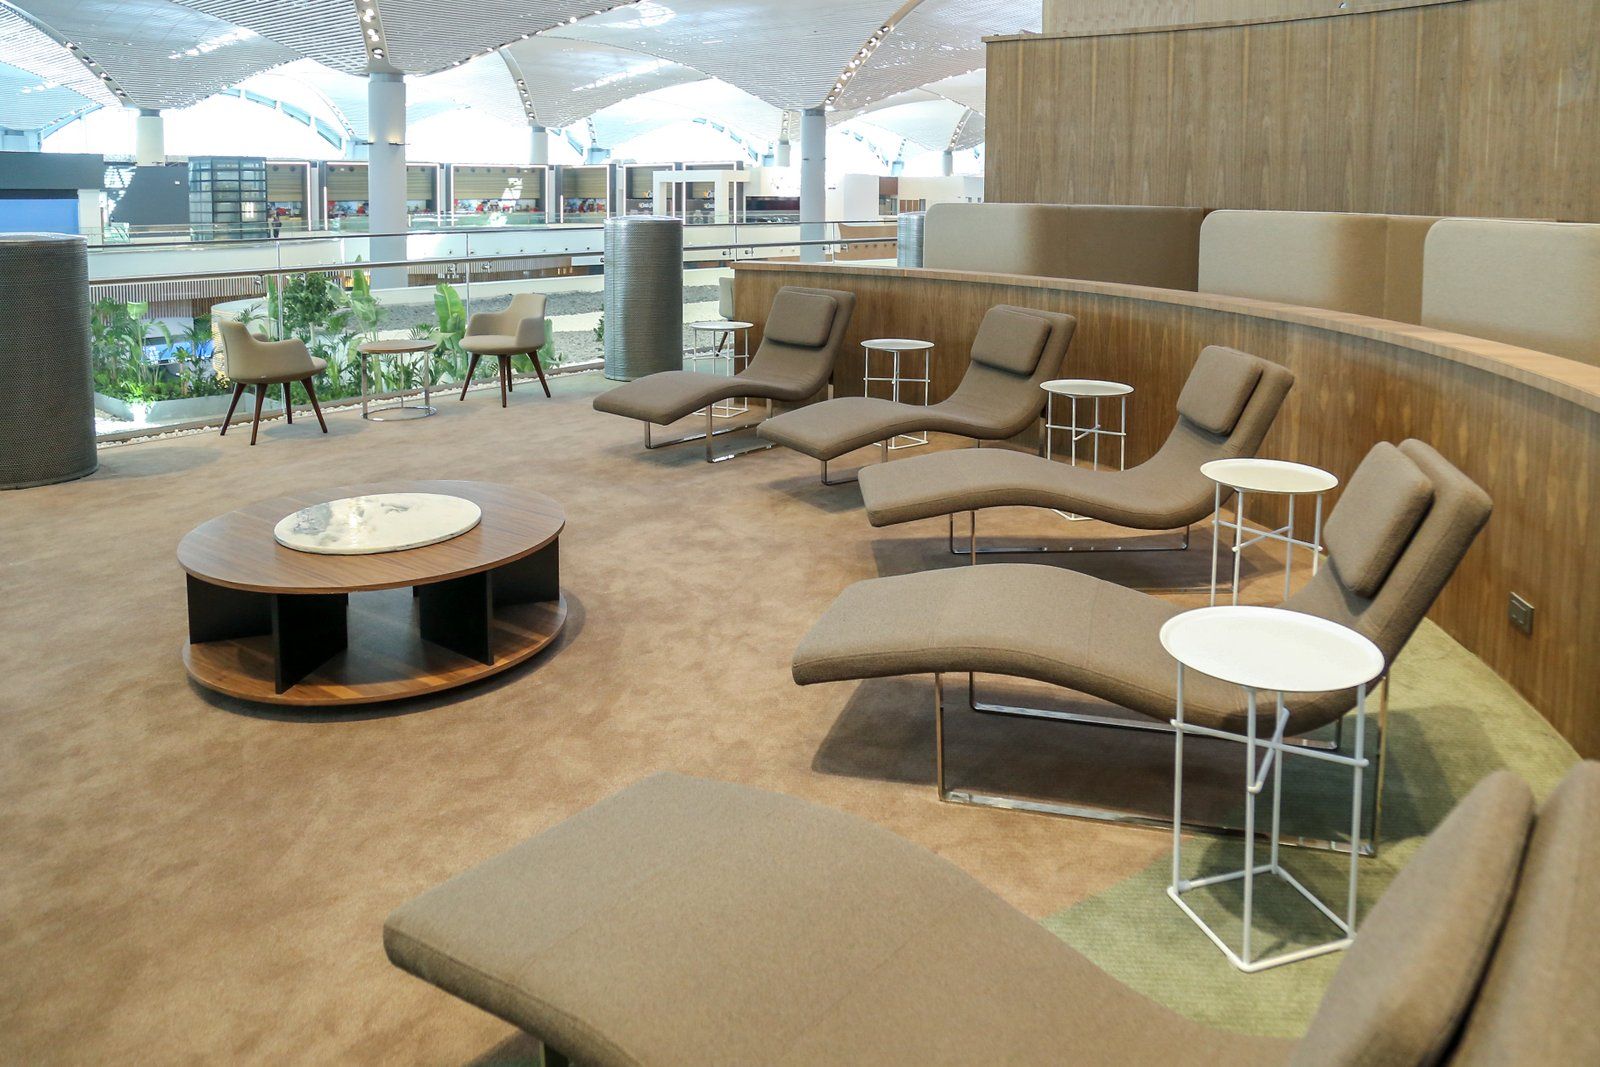 An Airport rest area with lounge chairs.